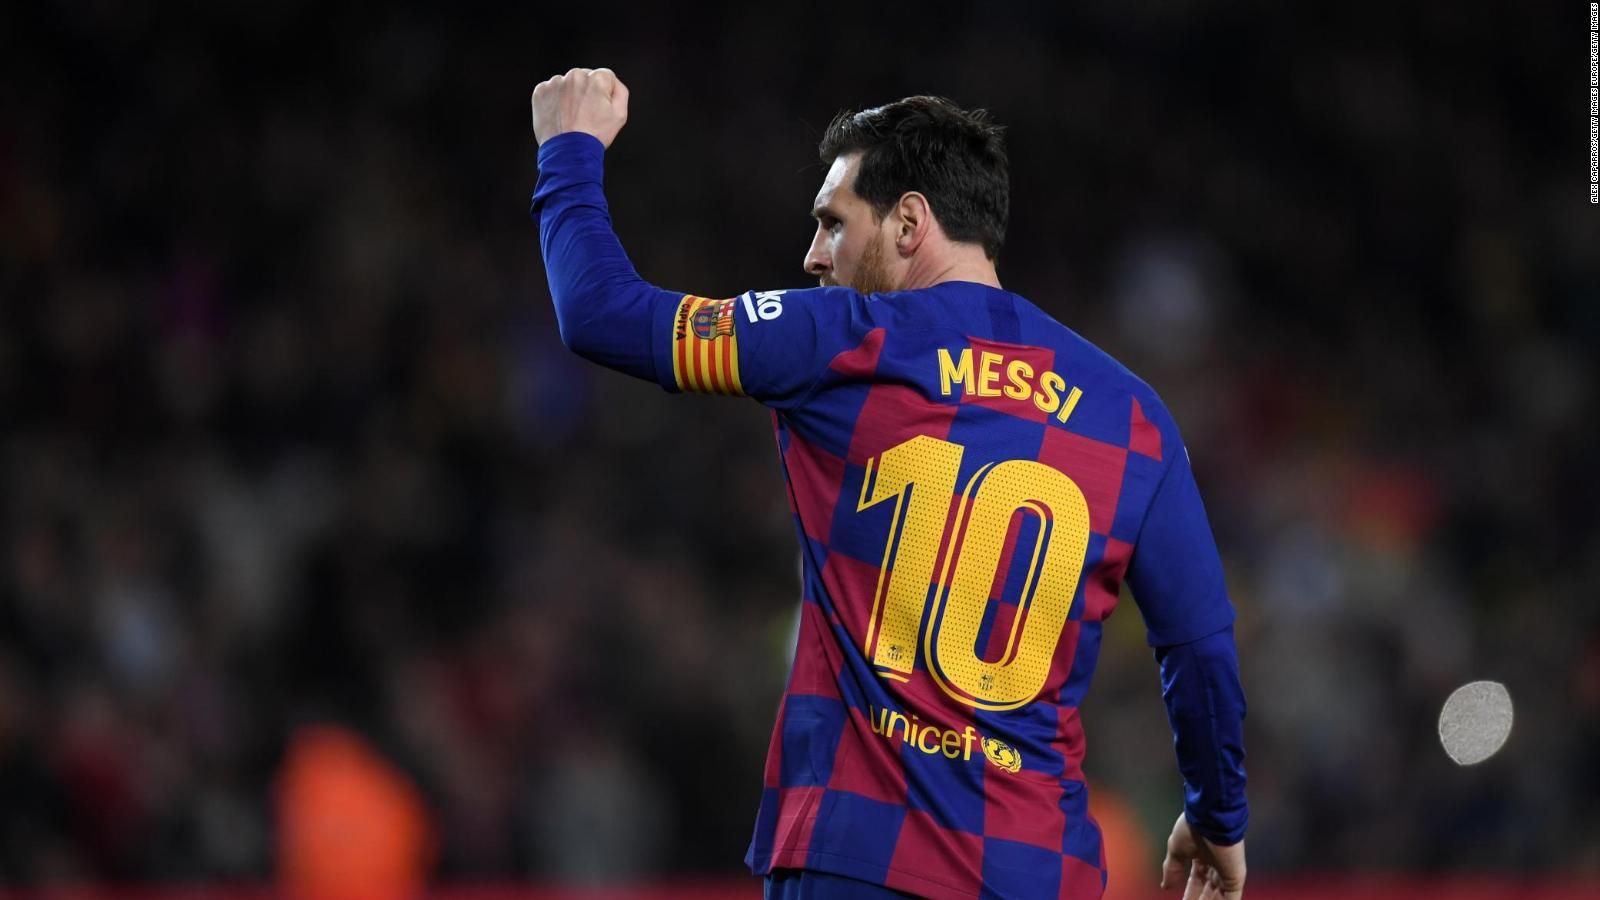 Historical: Lionel Messi scores goal 700 in his career Today News